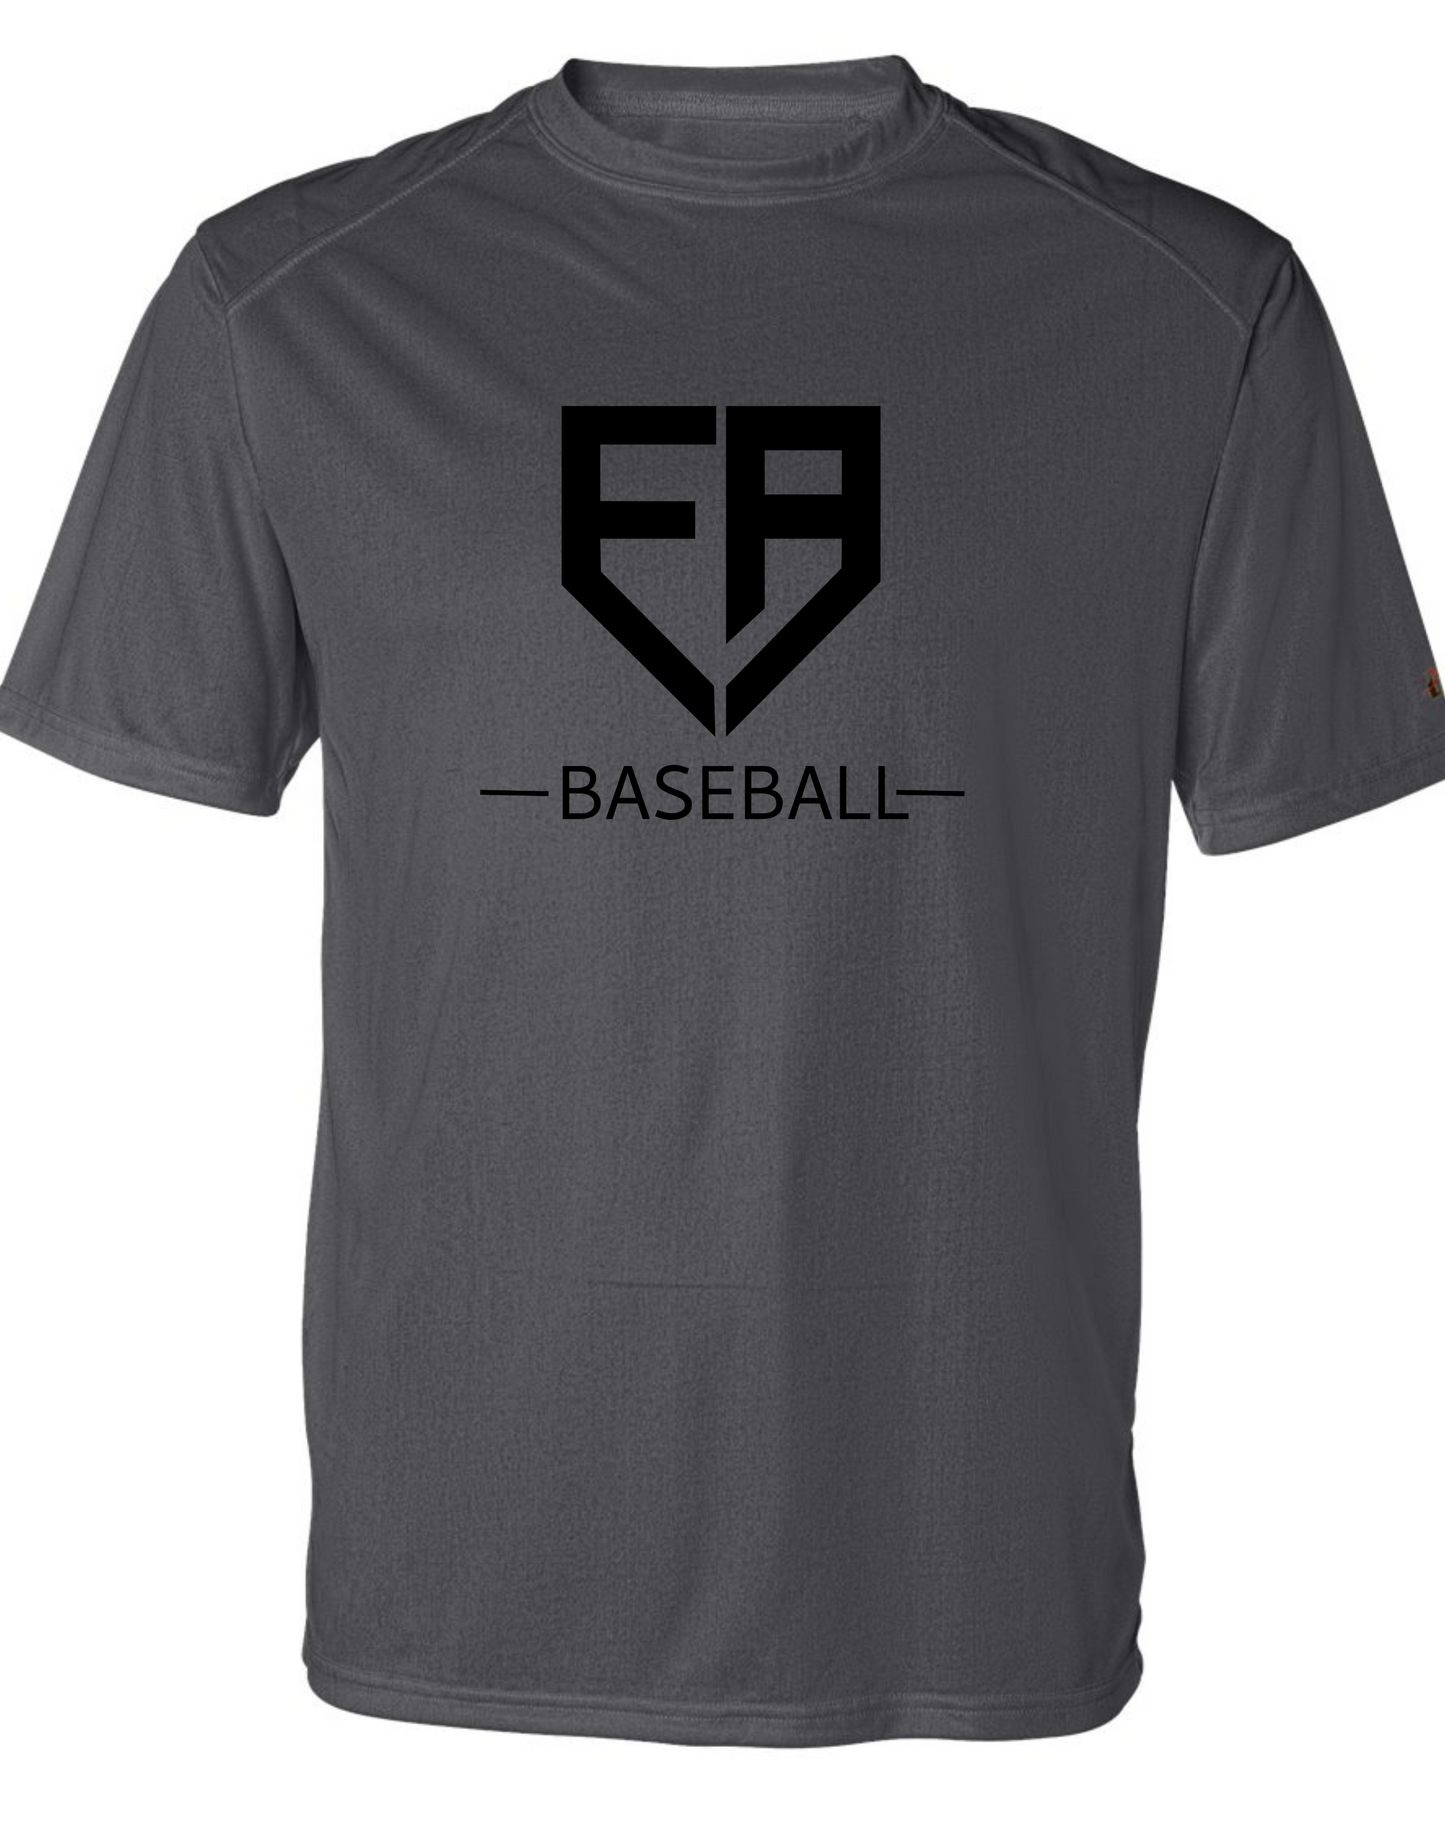 Graphite Color  ADULT/YOUTH Dri-Fit SHORT SLEEVE - Front Design Only